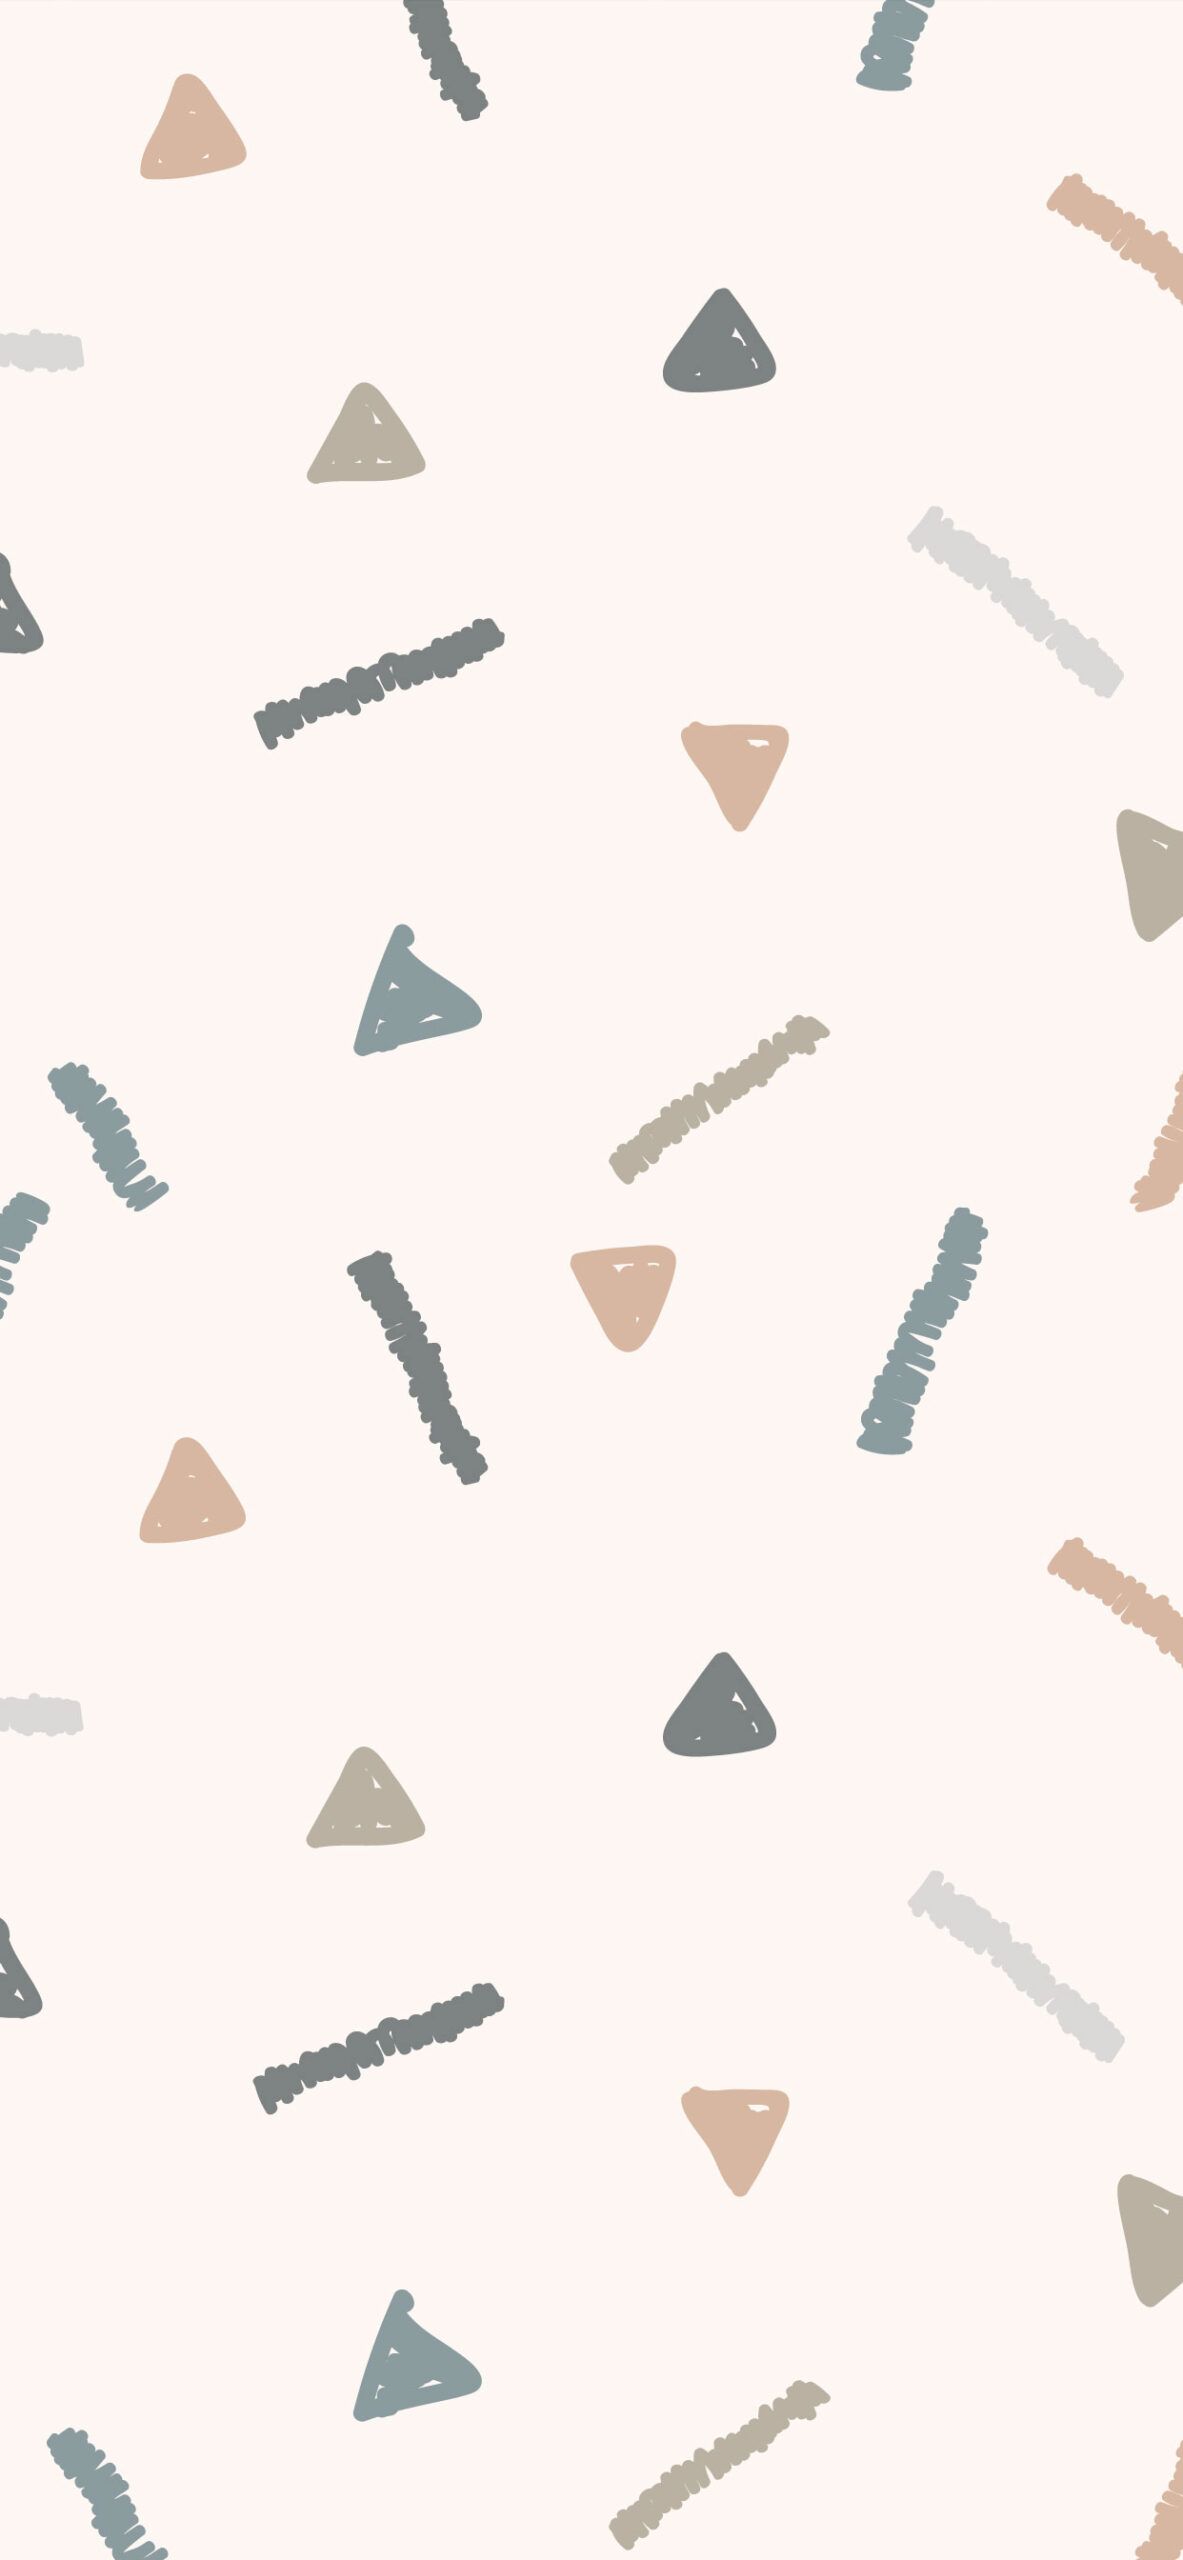 A pattern of pastel colored shapes on a white background - Boho